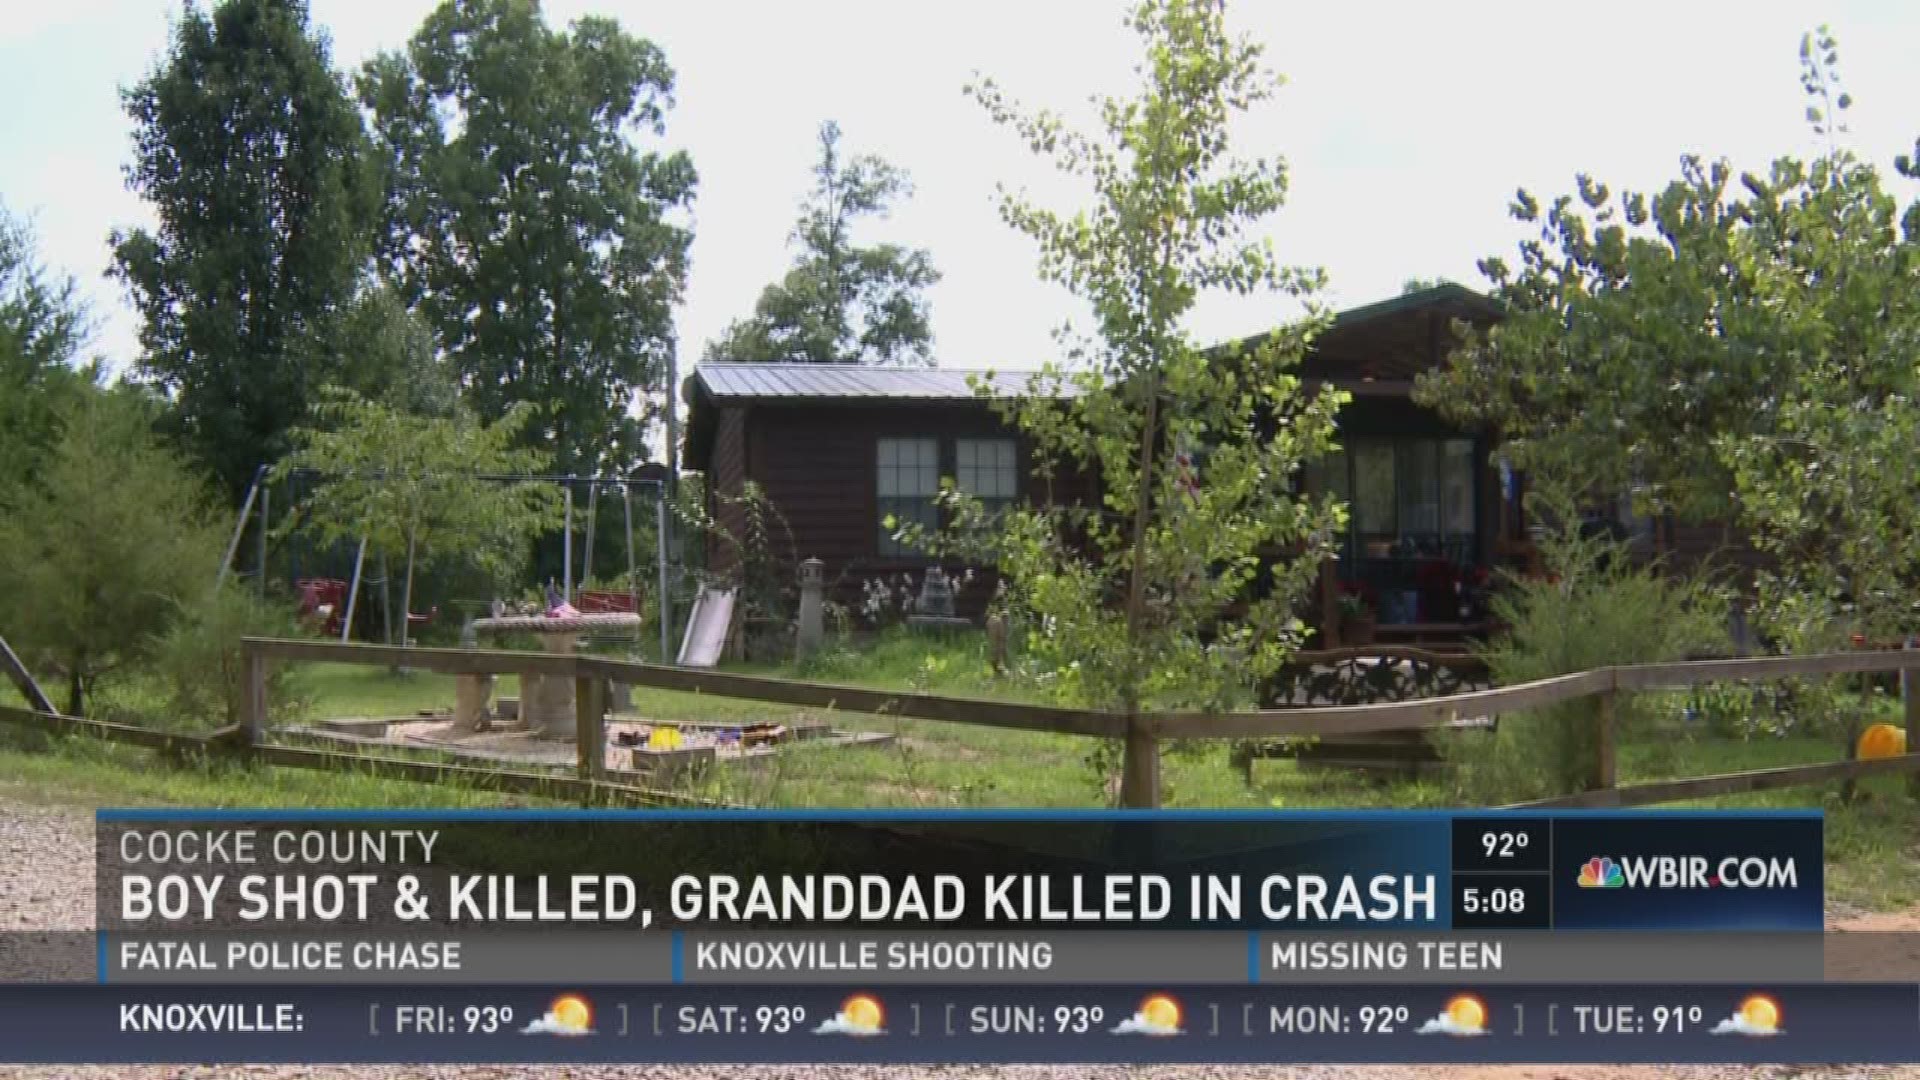 A seven-year-old boy was found dead of a gunshot wound, and his grandfather died in a car crash shortly after.